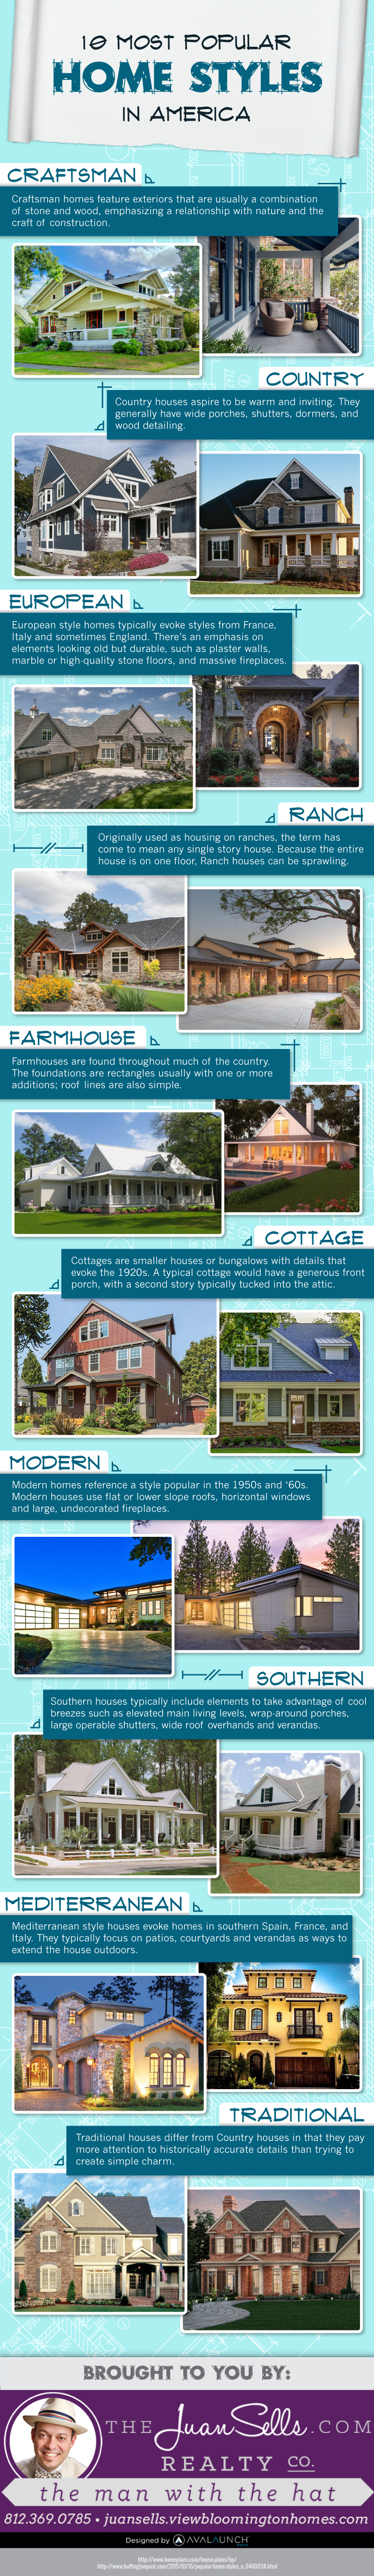 Popular home styles are illustrated and described.